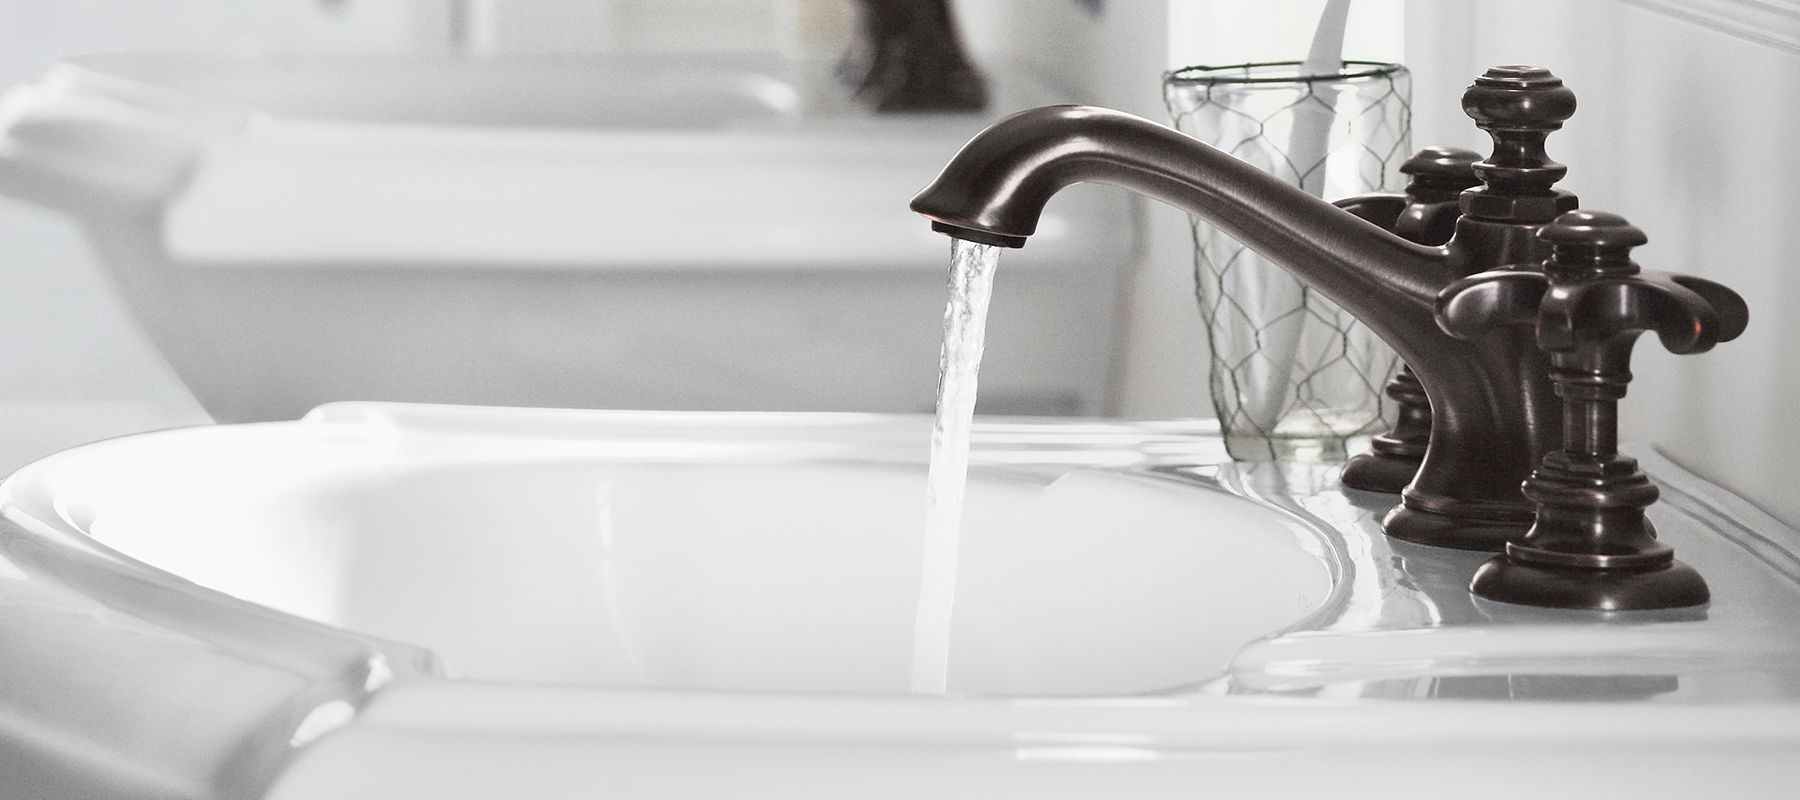 Installing Tips For Bathroom Sink Faucets